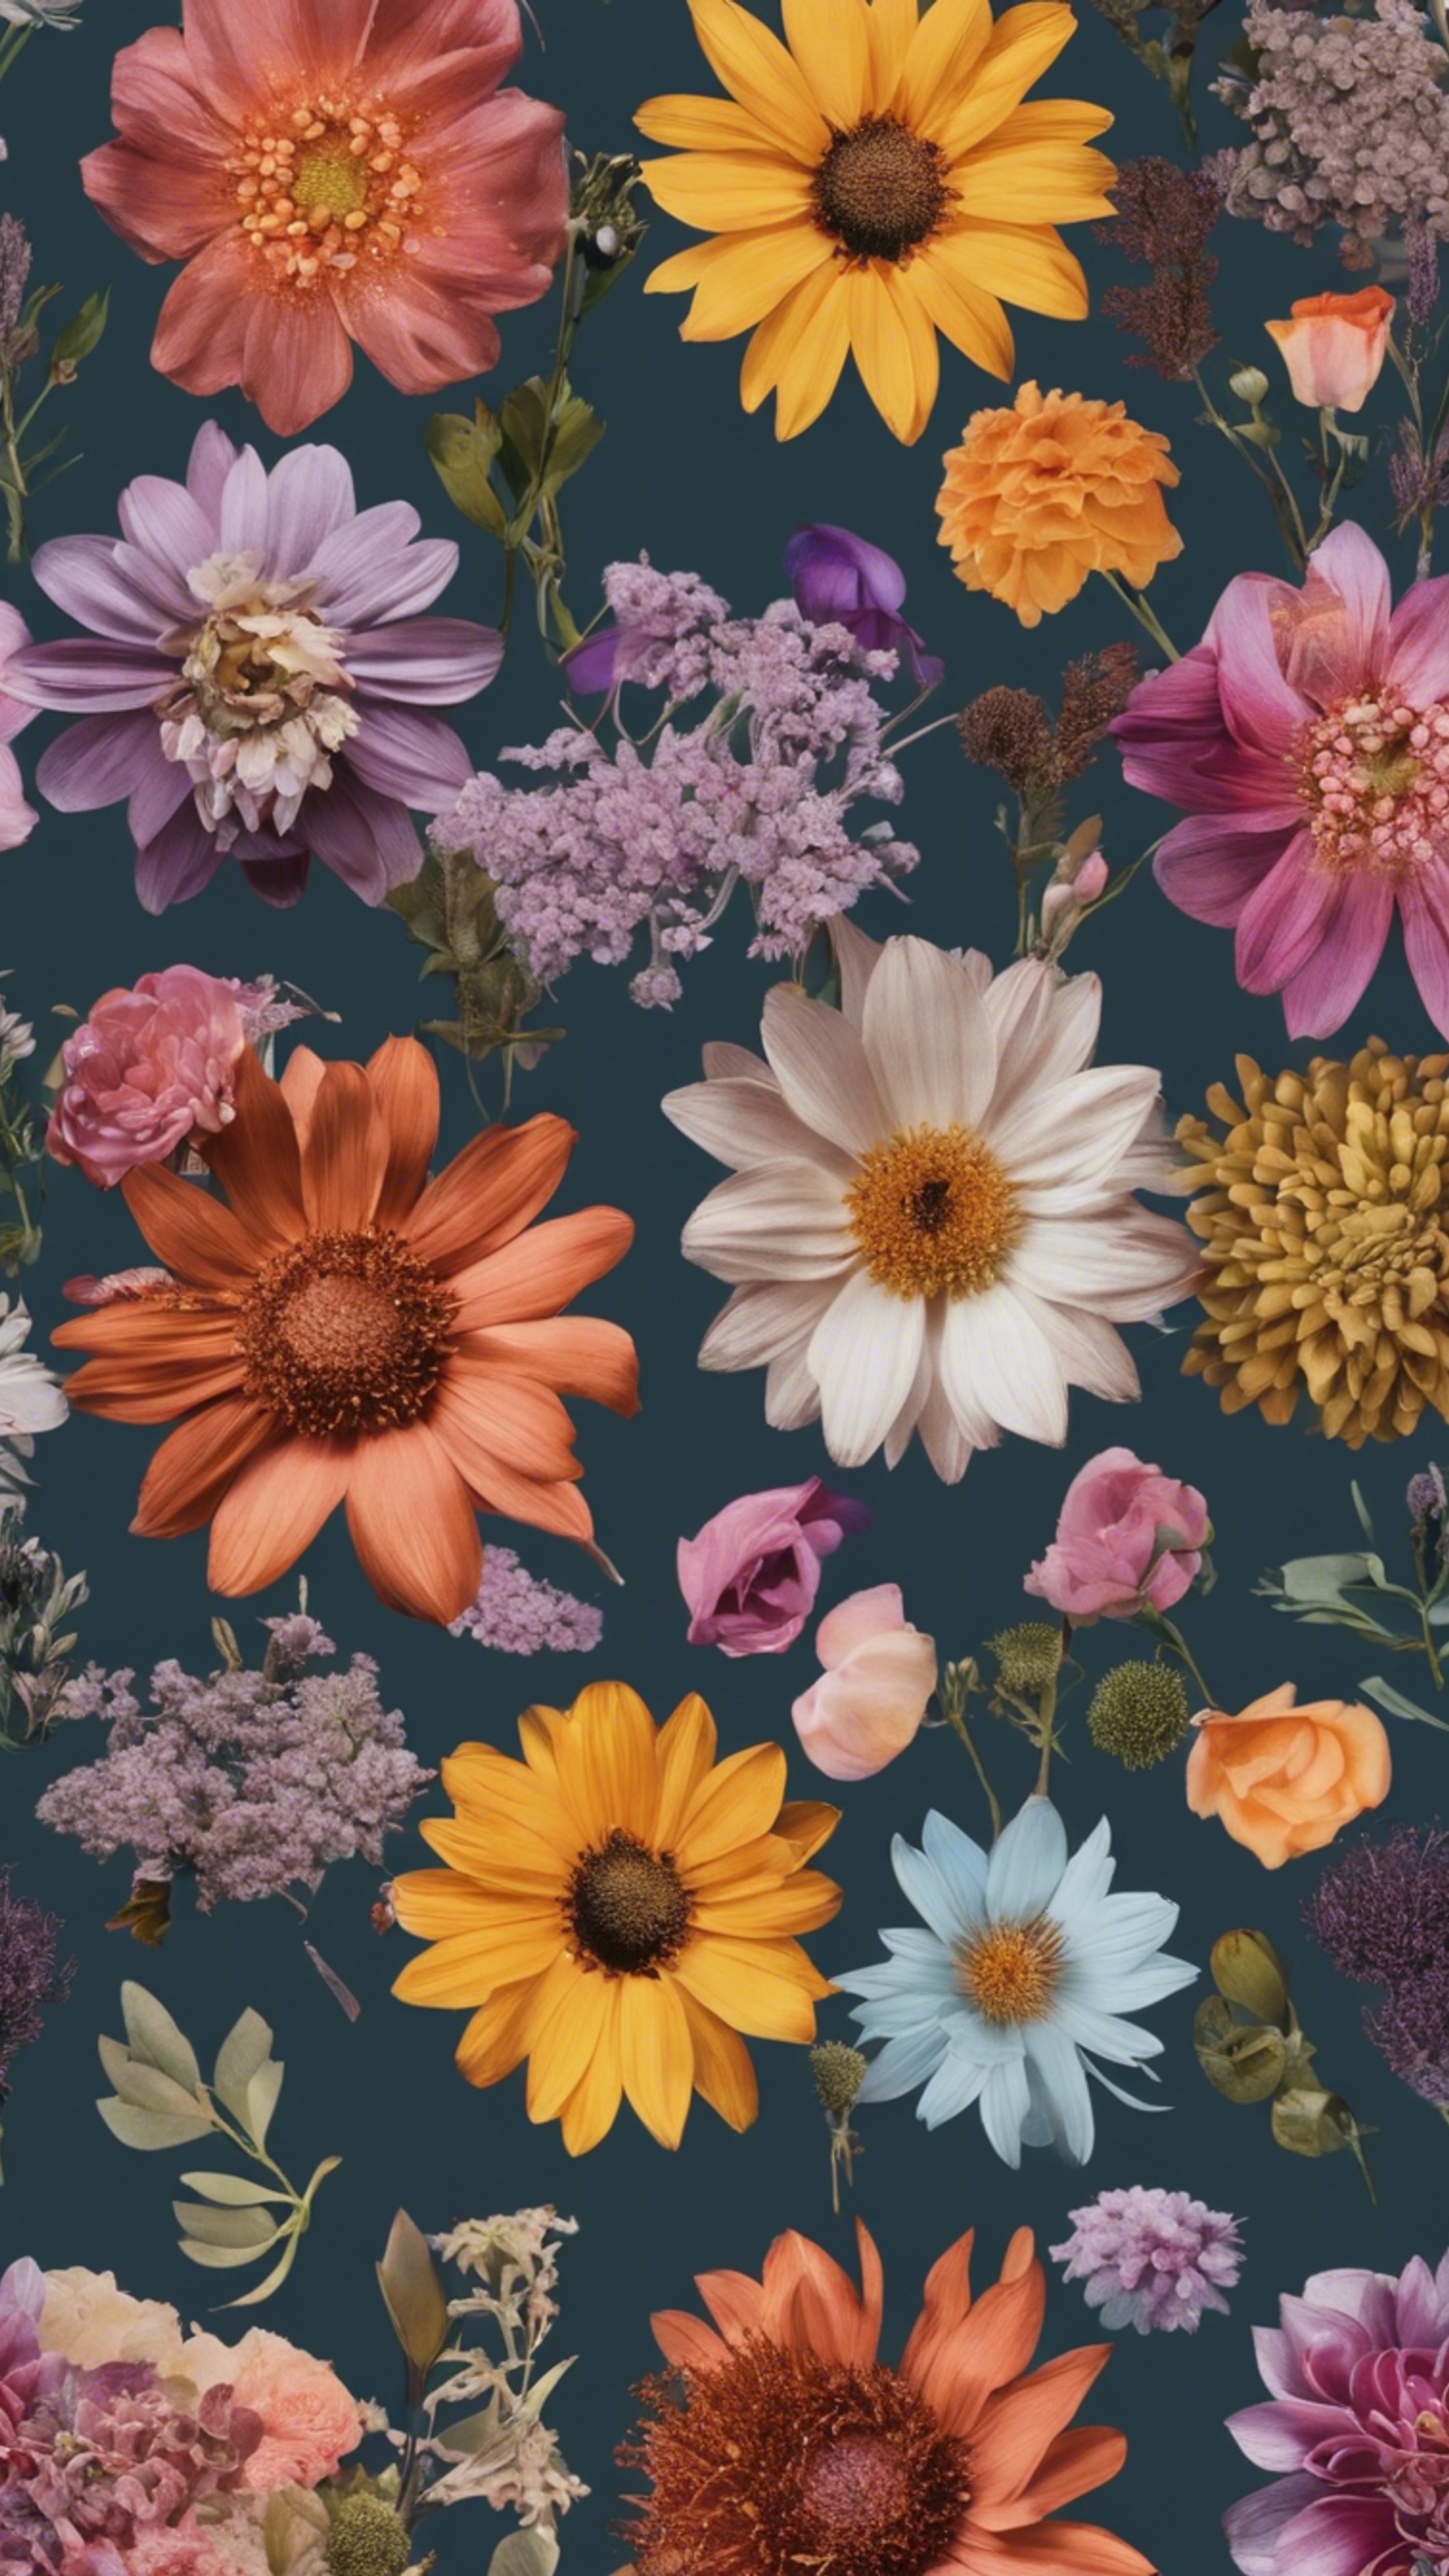 Multiple flowers of different types and colors, distinctively arranged in a bohemian floral design pattern. Tapet[d475d4e8f3a0489d92d5]